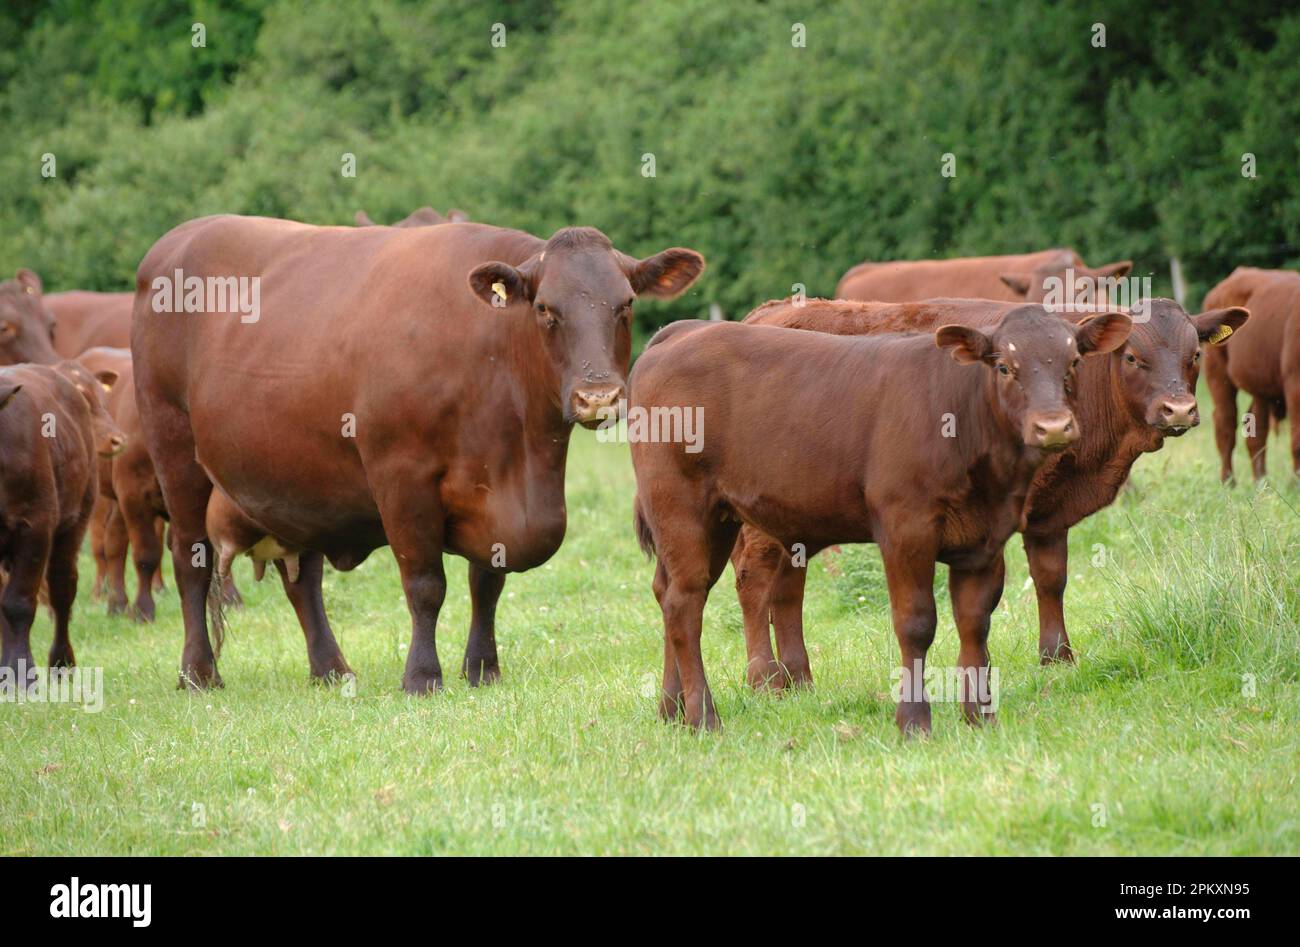 Domestic Cattle, Sussex cows with calves, herd standing in pasture, England, United Kingdom Stock Photo